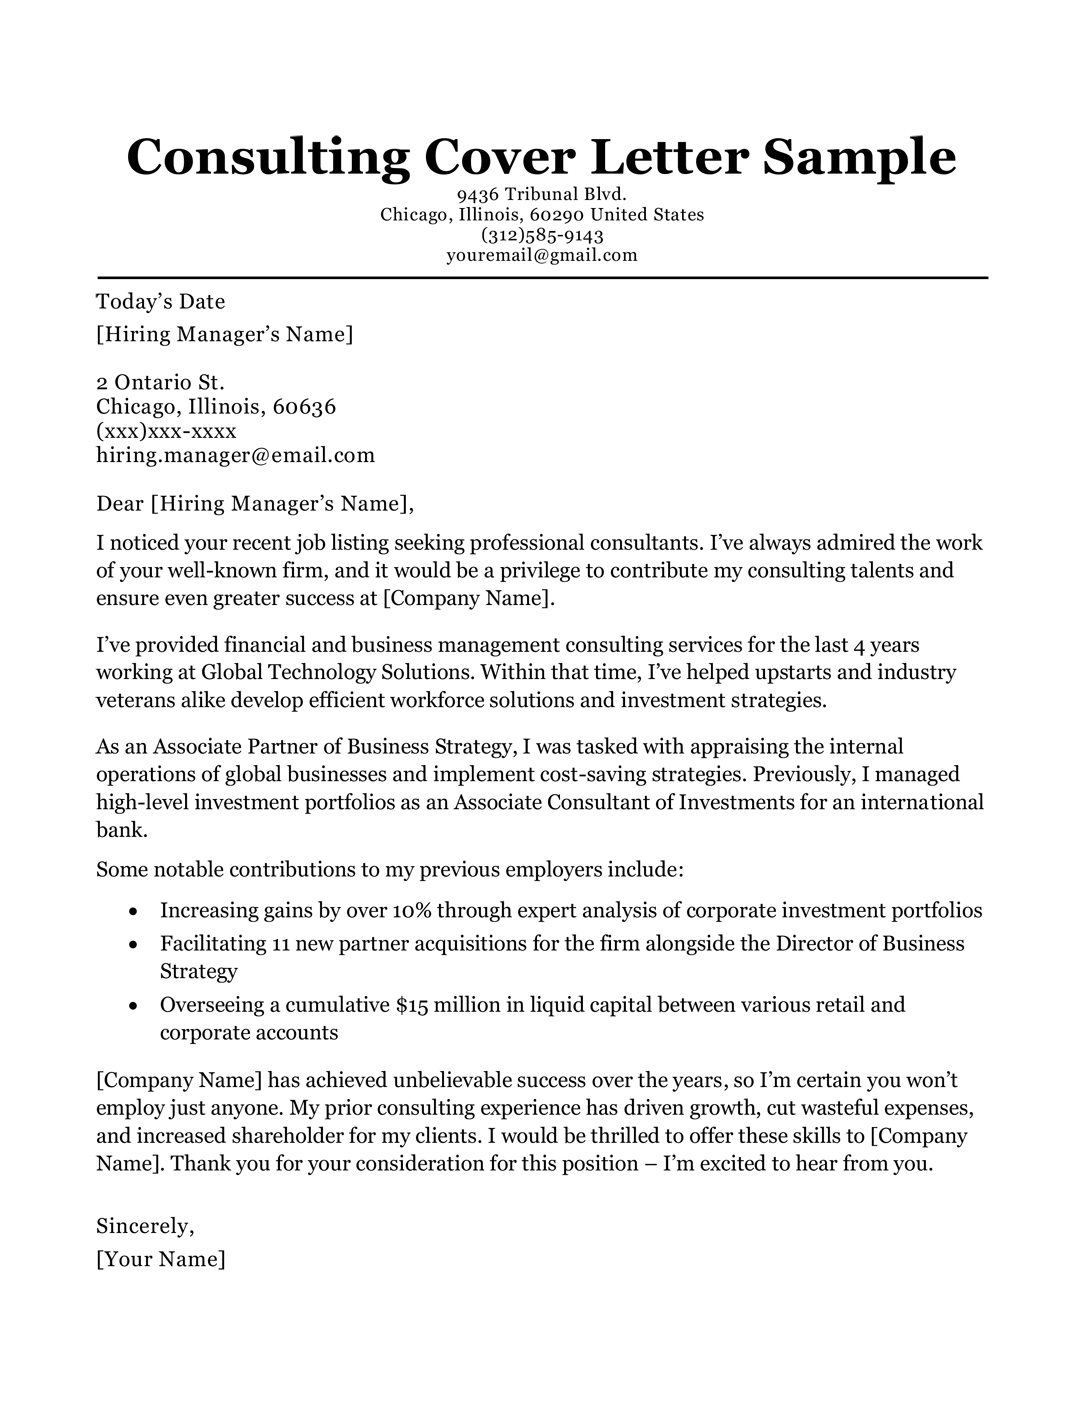 business consultant cover letter